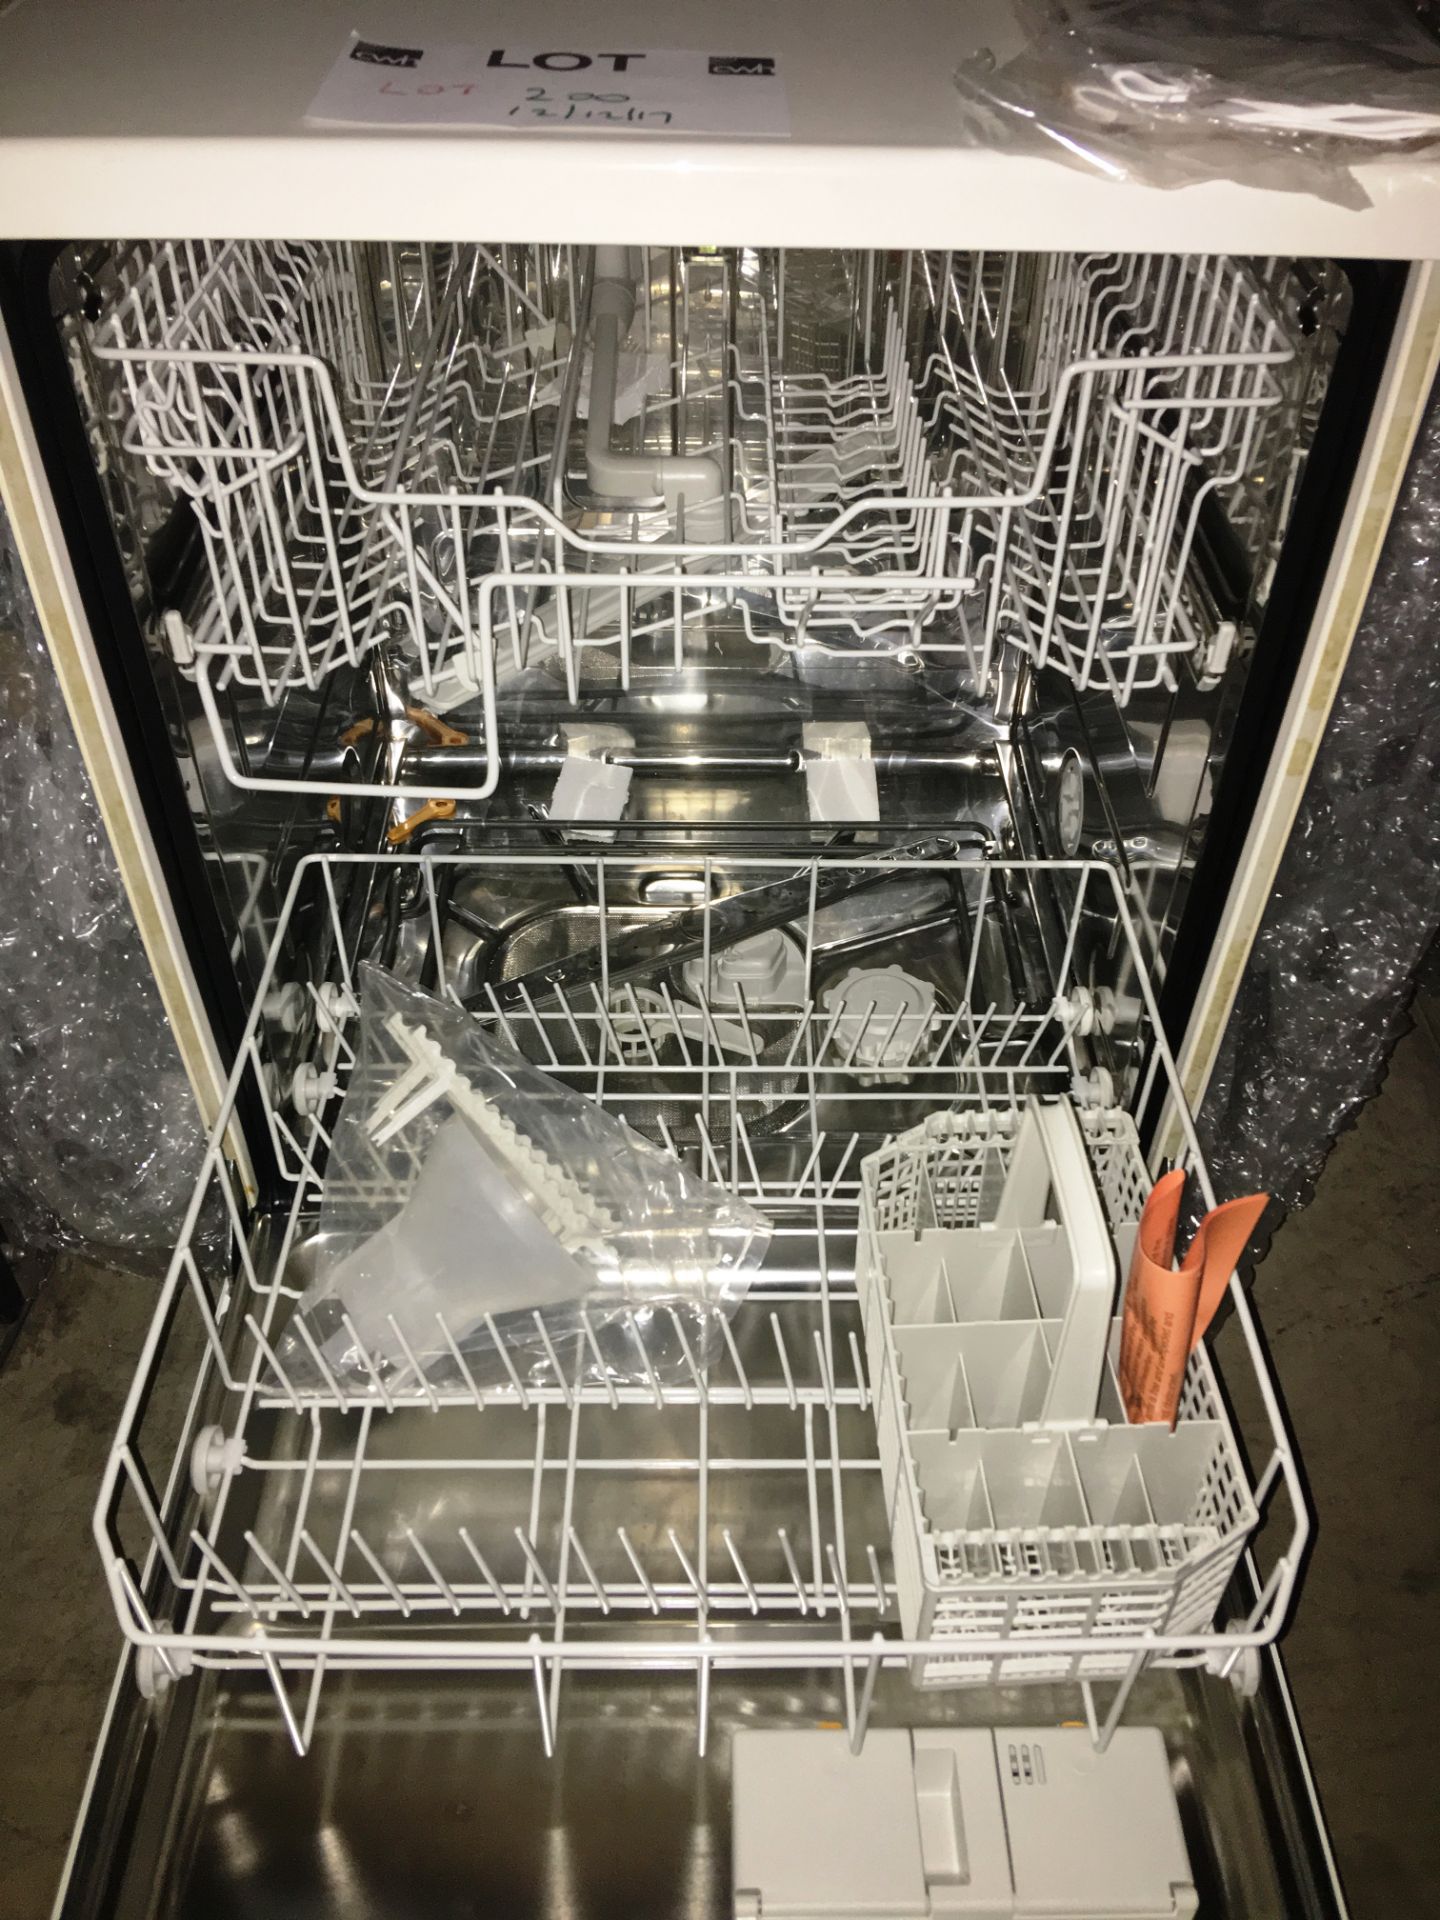 A Miele G638 Plus dishwasher complete with manuals - new & unused. - Image 3 of 3